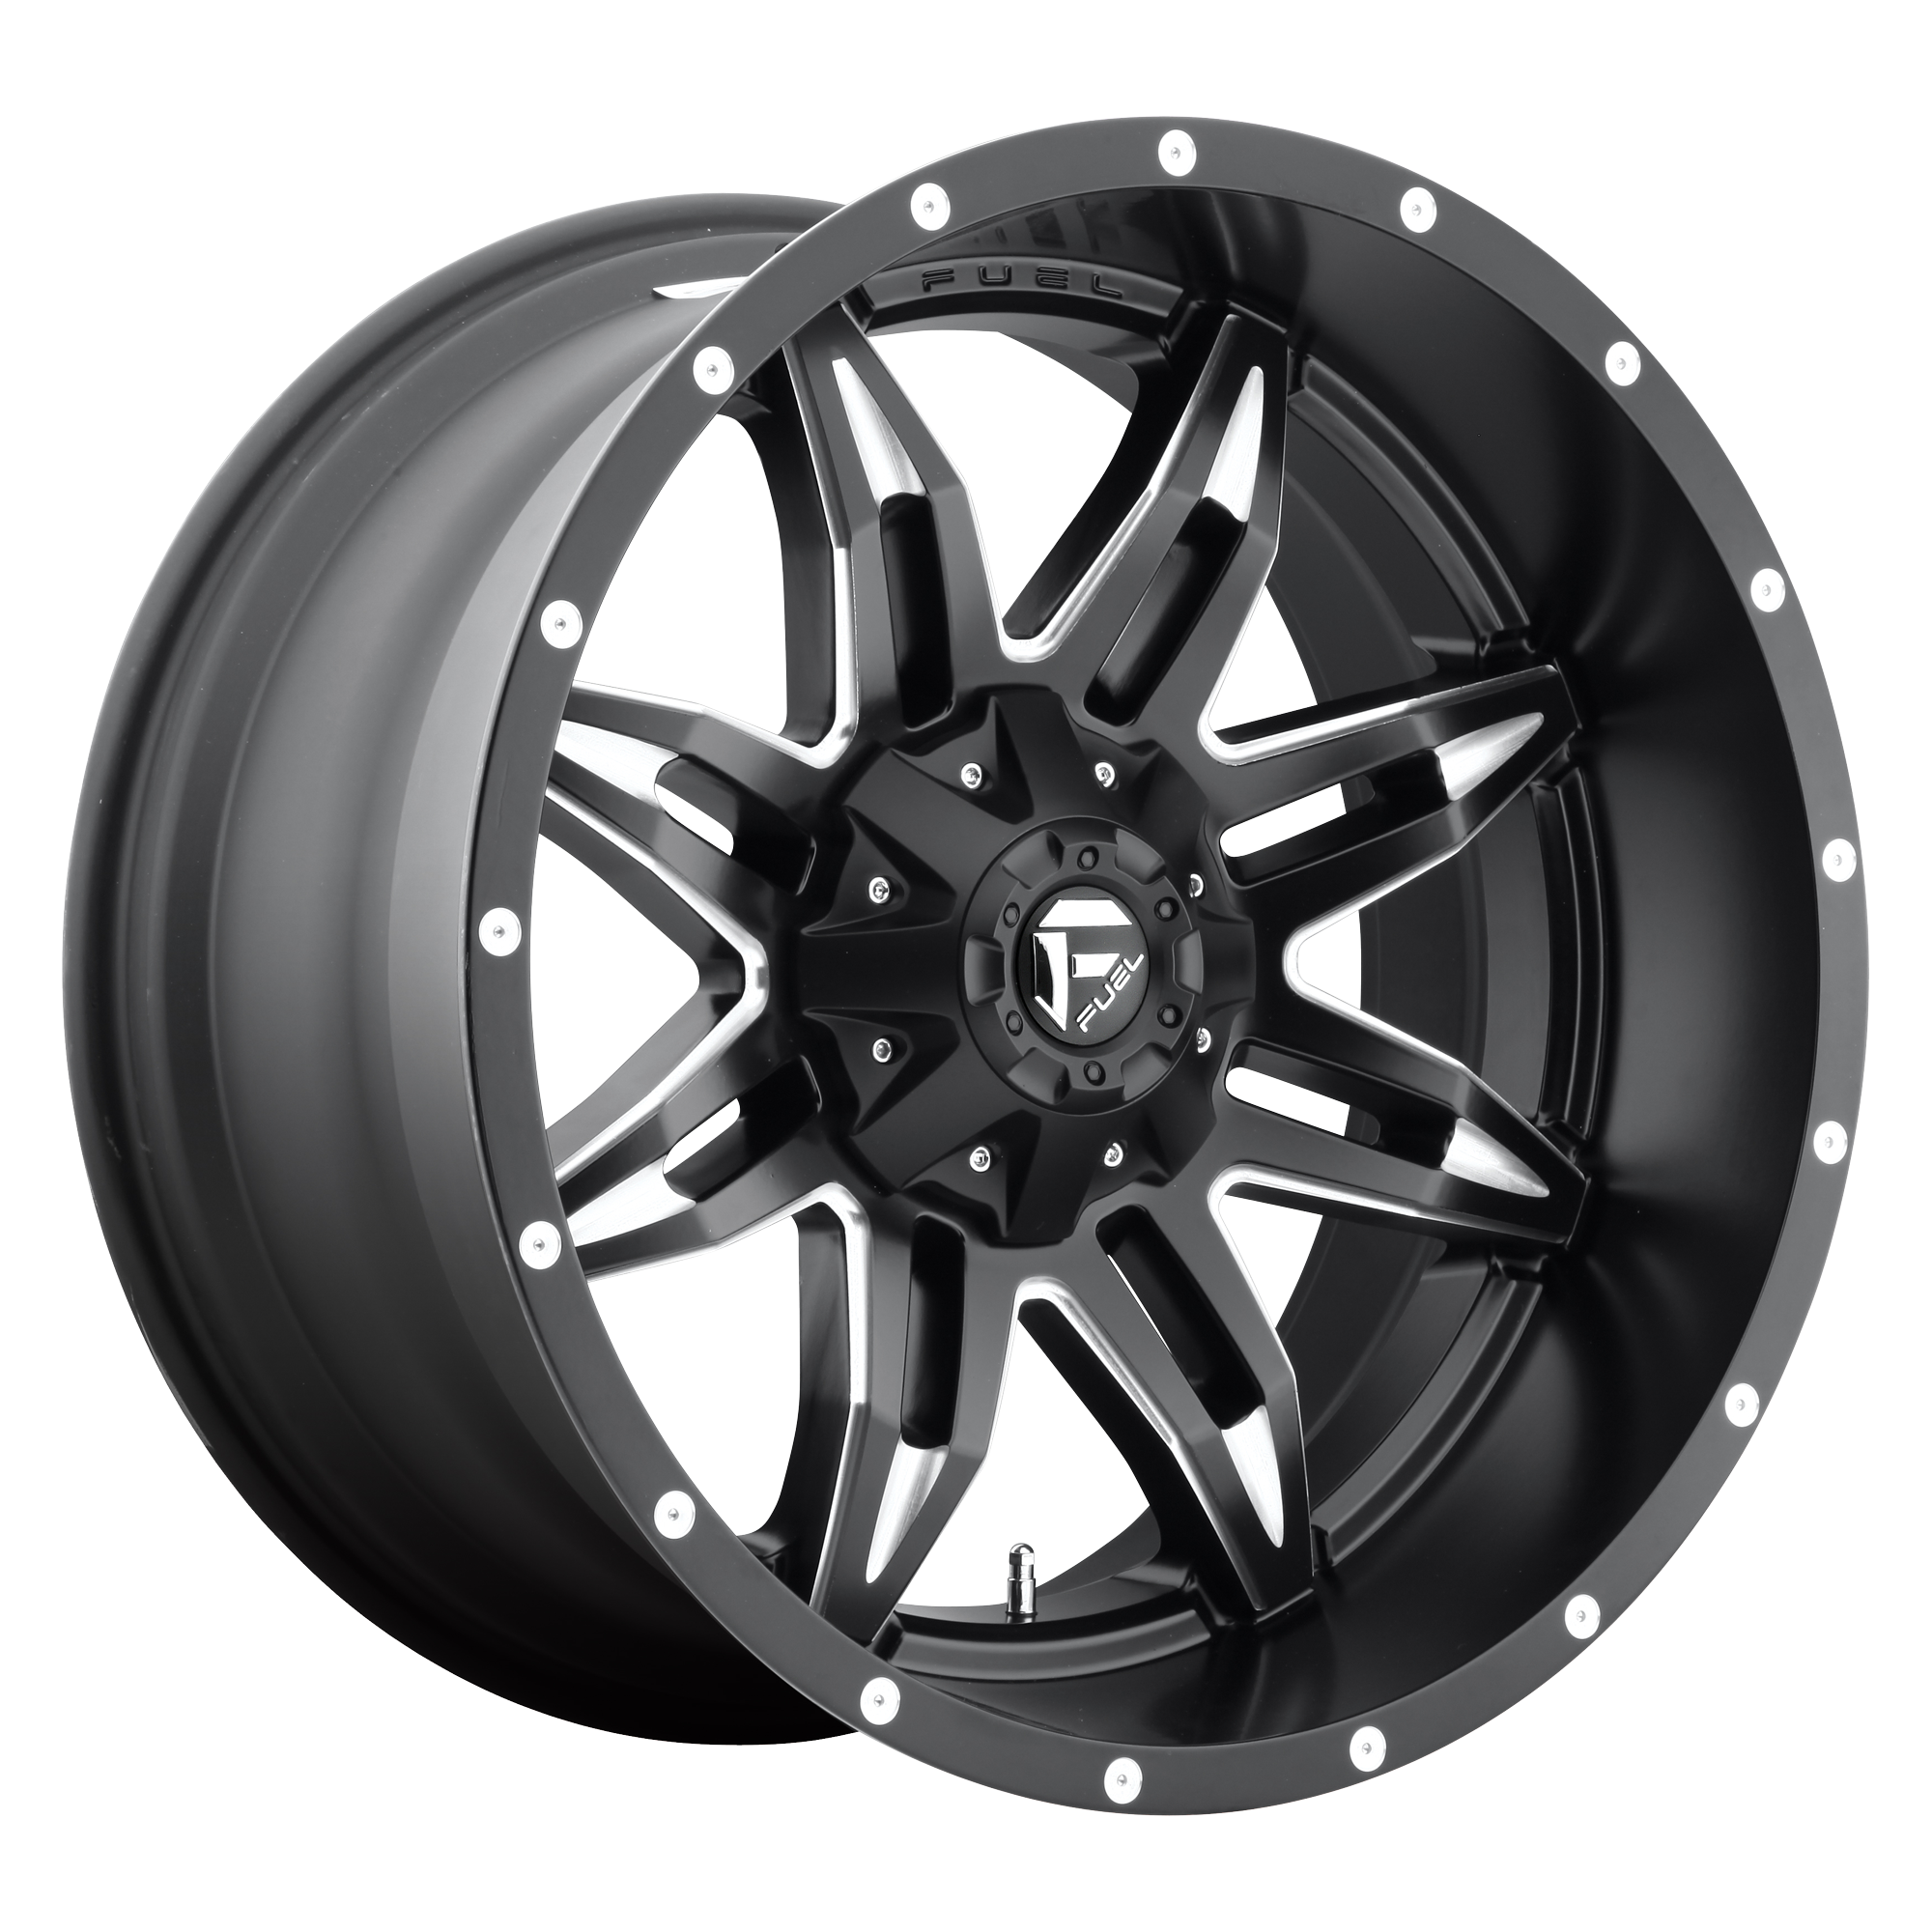 LETHAL 20x9 5x114.30/5x127.00 MATTE BLACK MILLED (1 mm) - Tires and Engine Performance